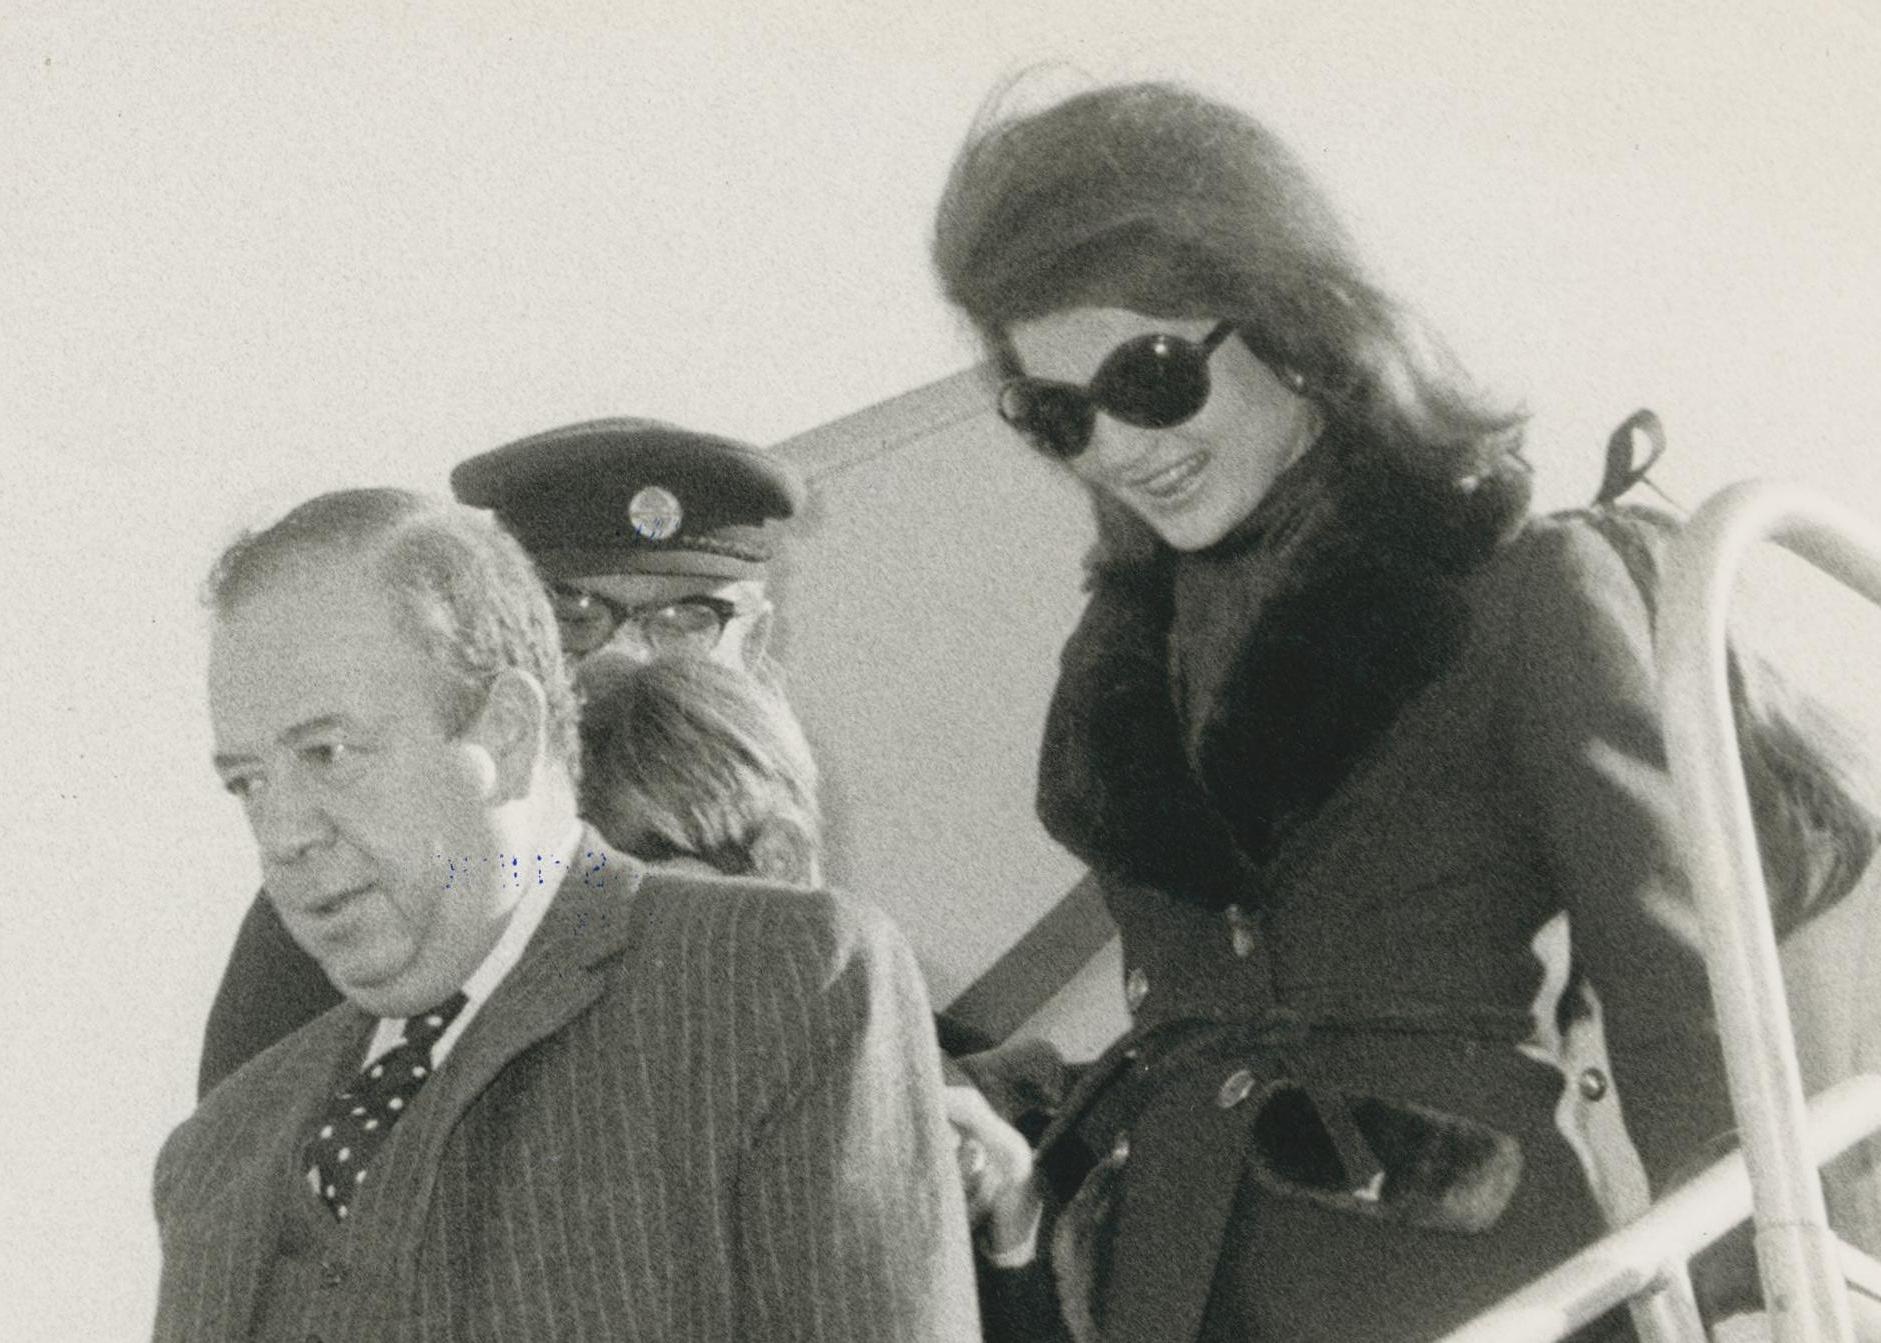 Jackie Kennedy leaving the plane, 1970s - Photograph by Unknown